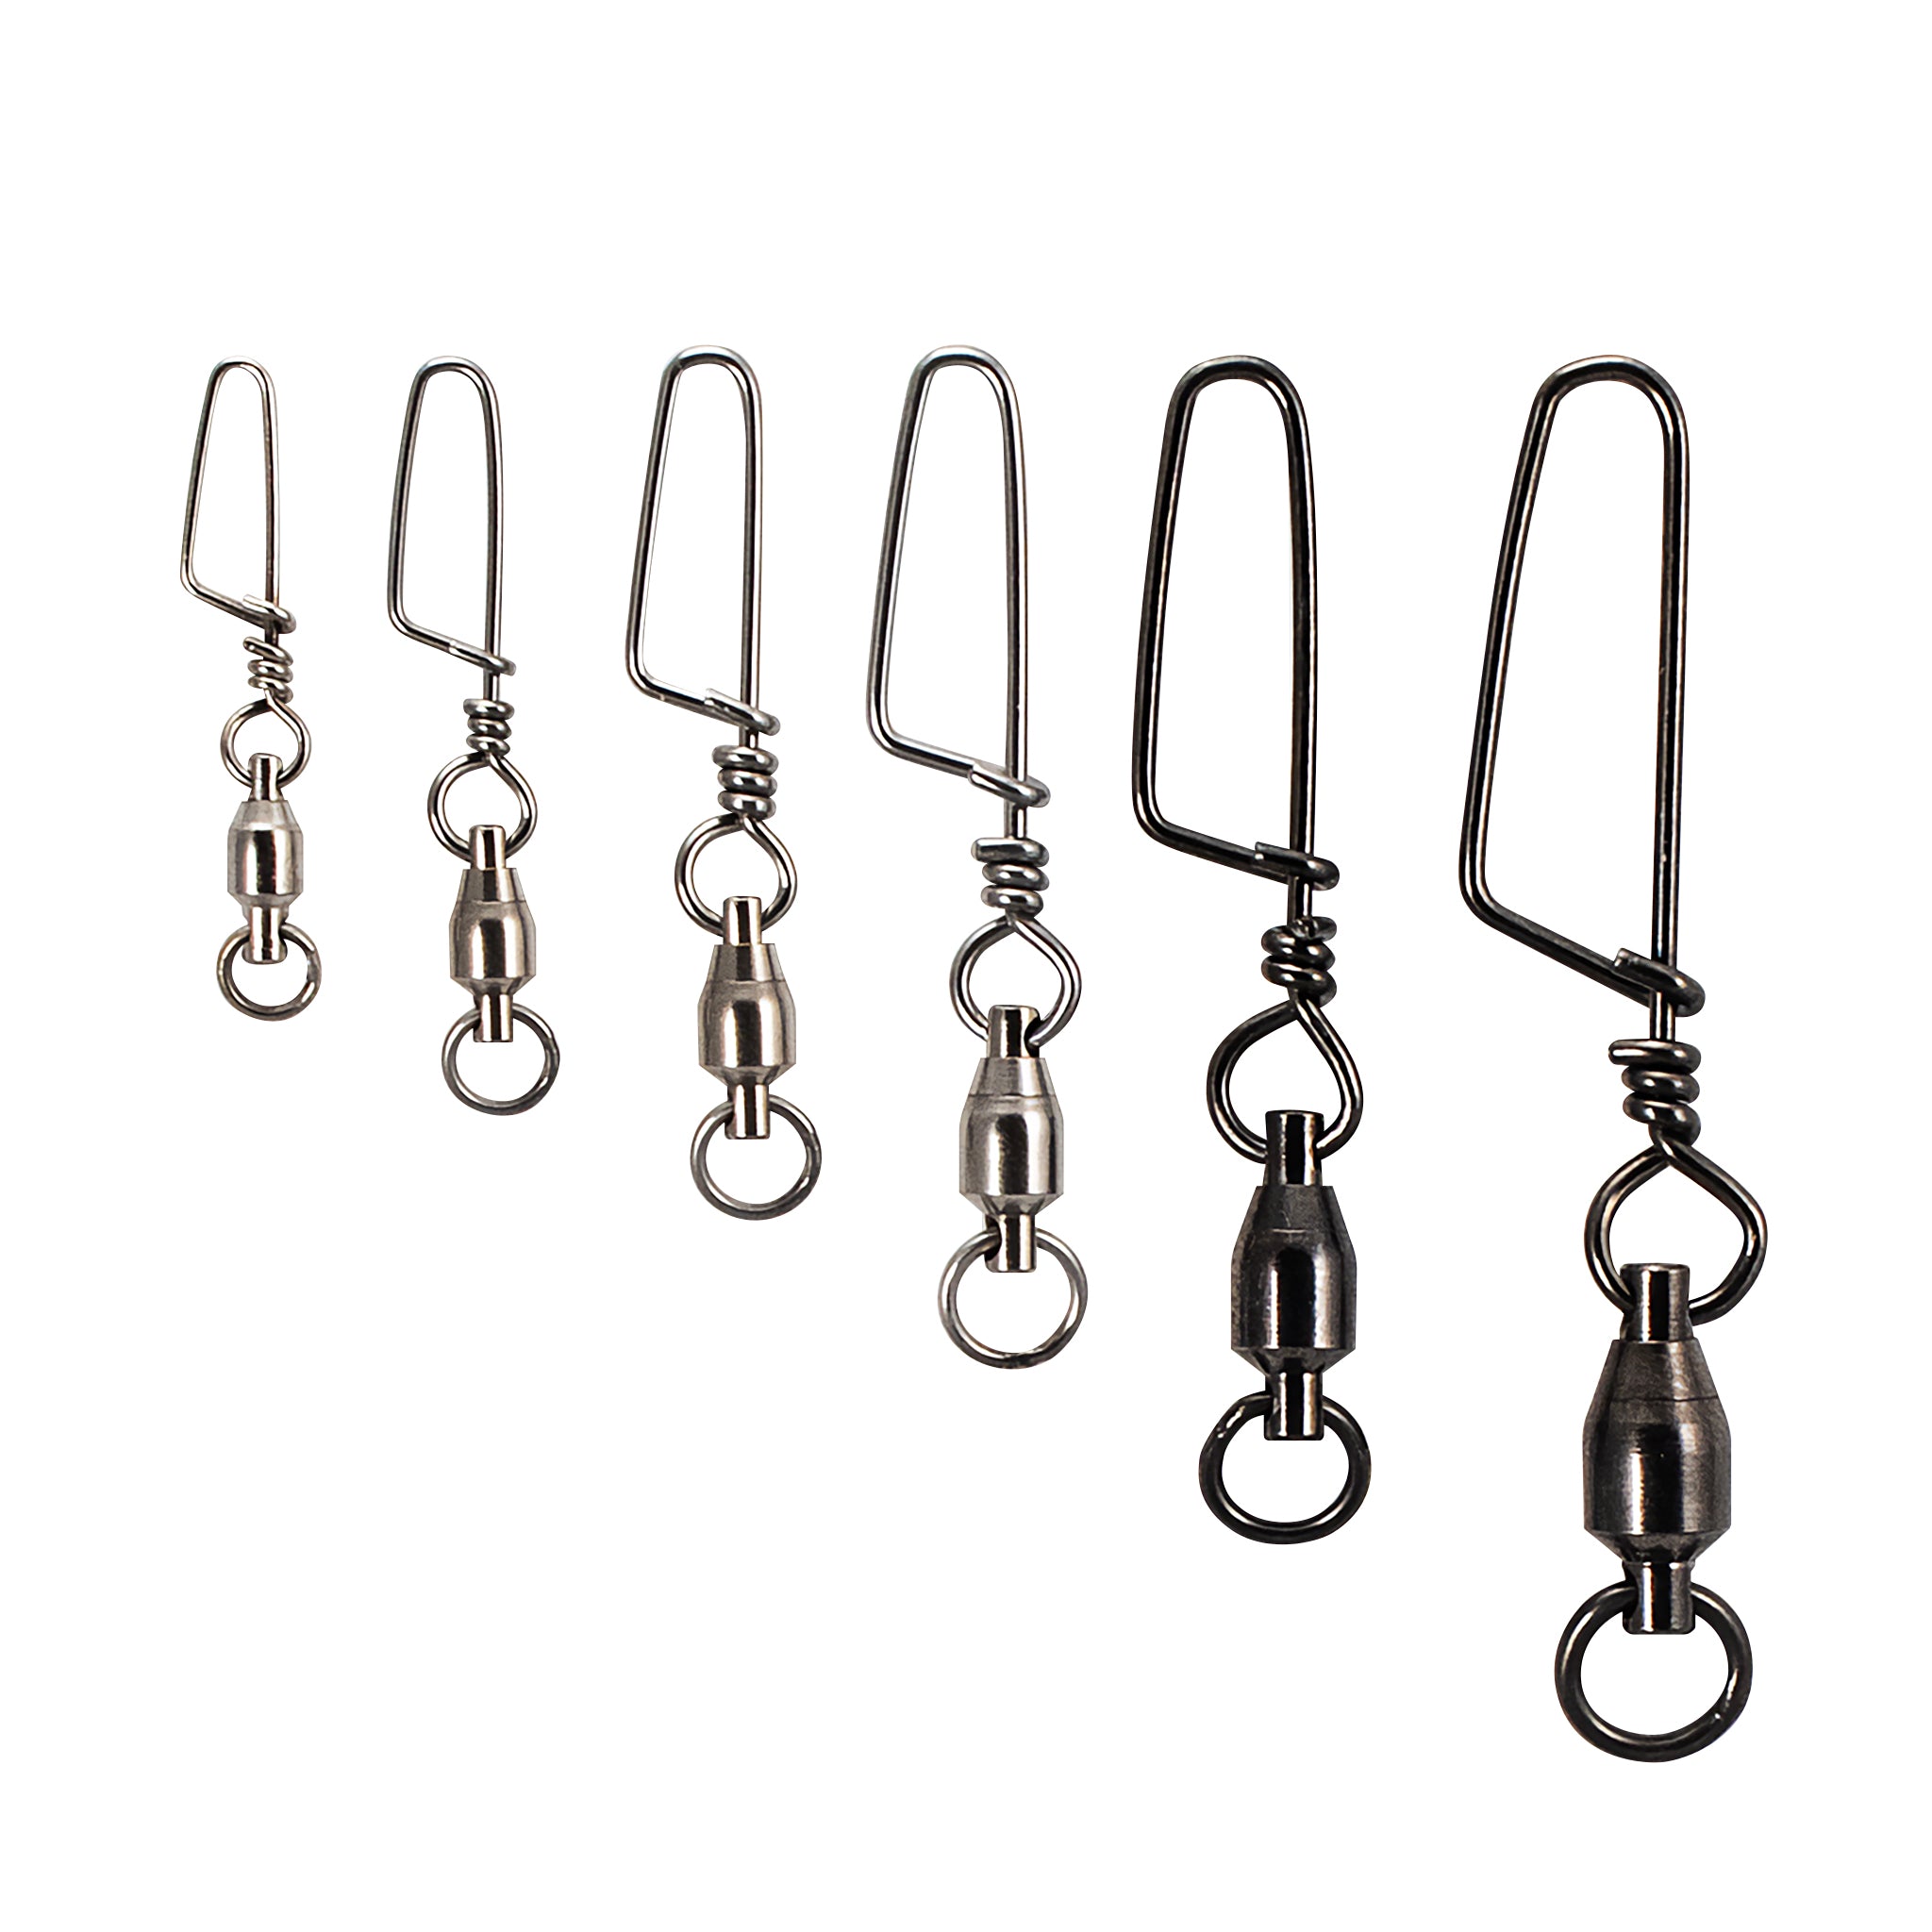 Stainless Steel Ball Bearing Swivel -5-Pack - Church Tackle